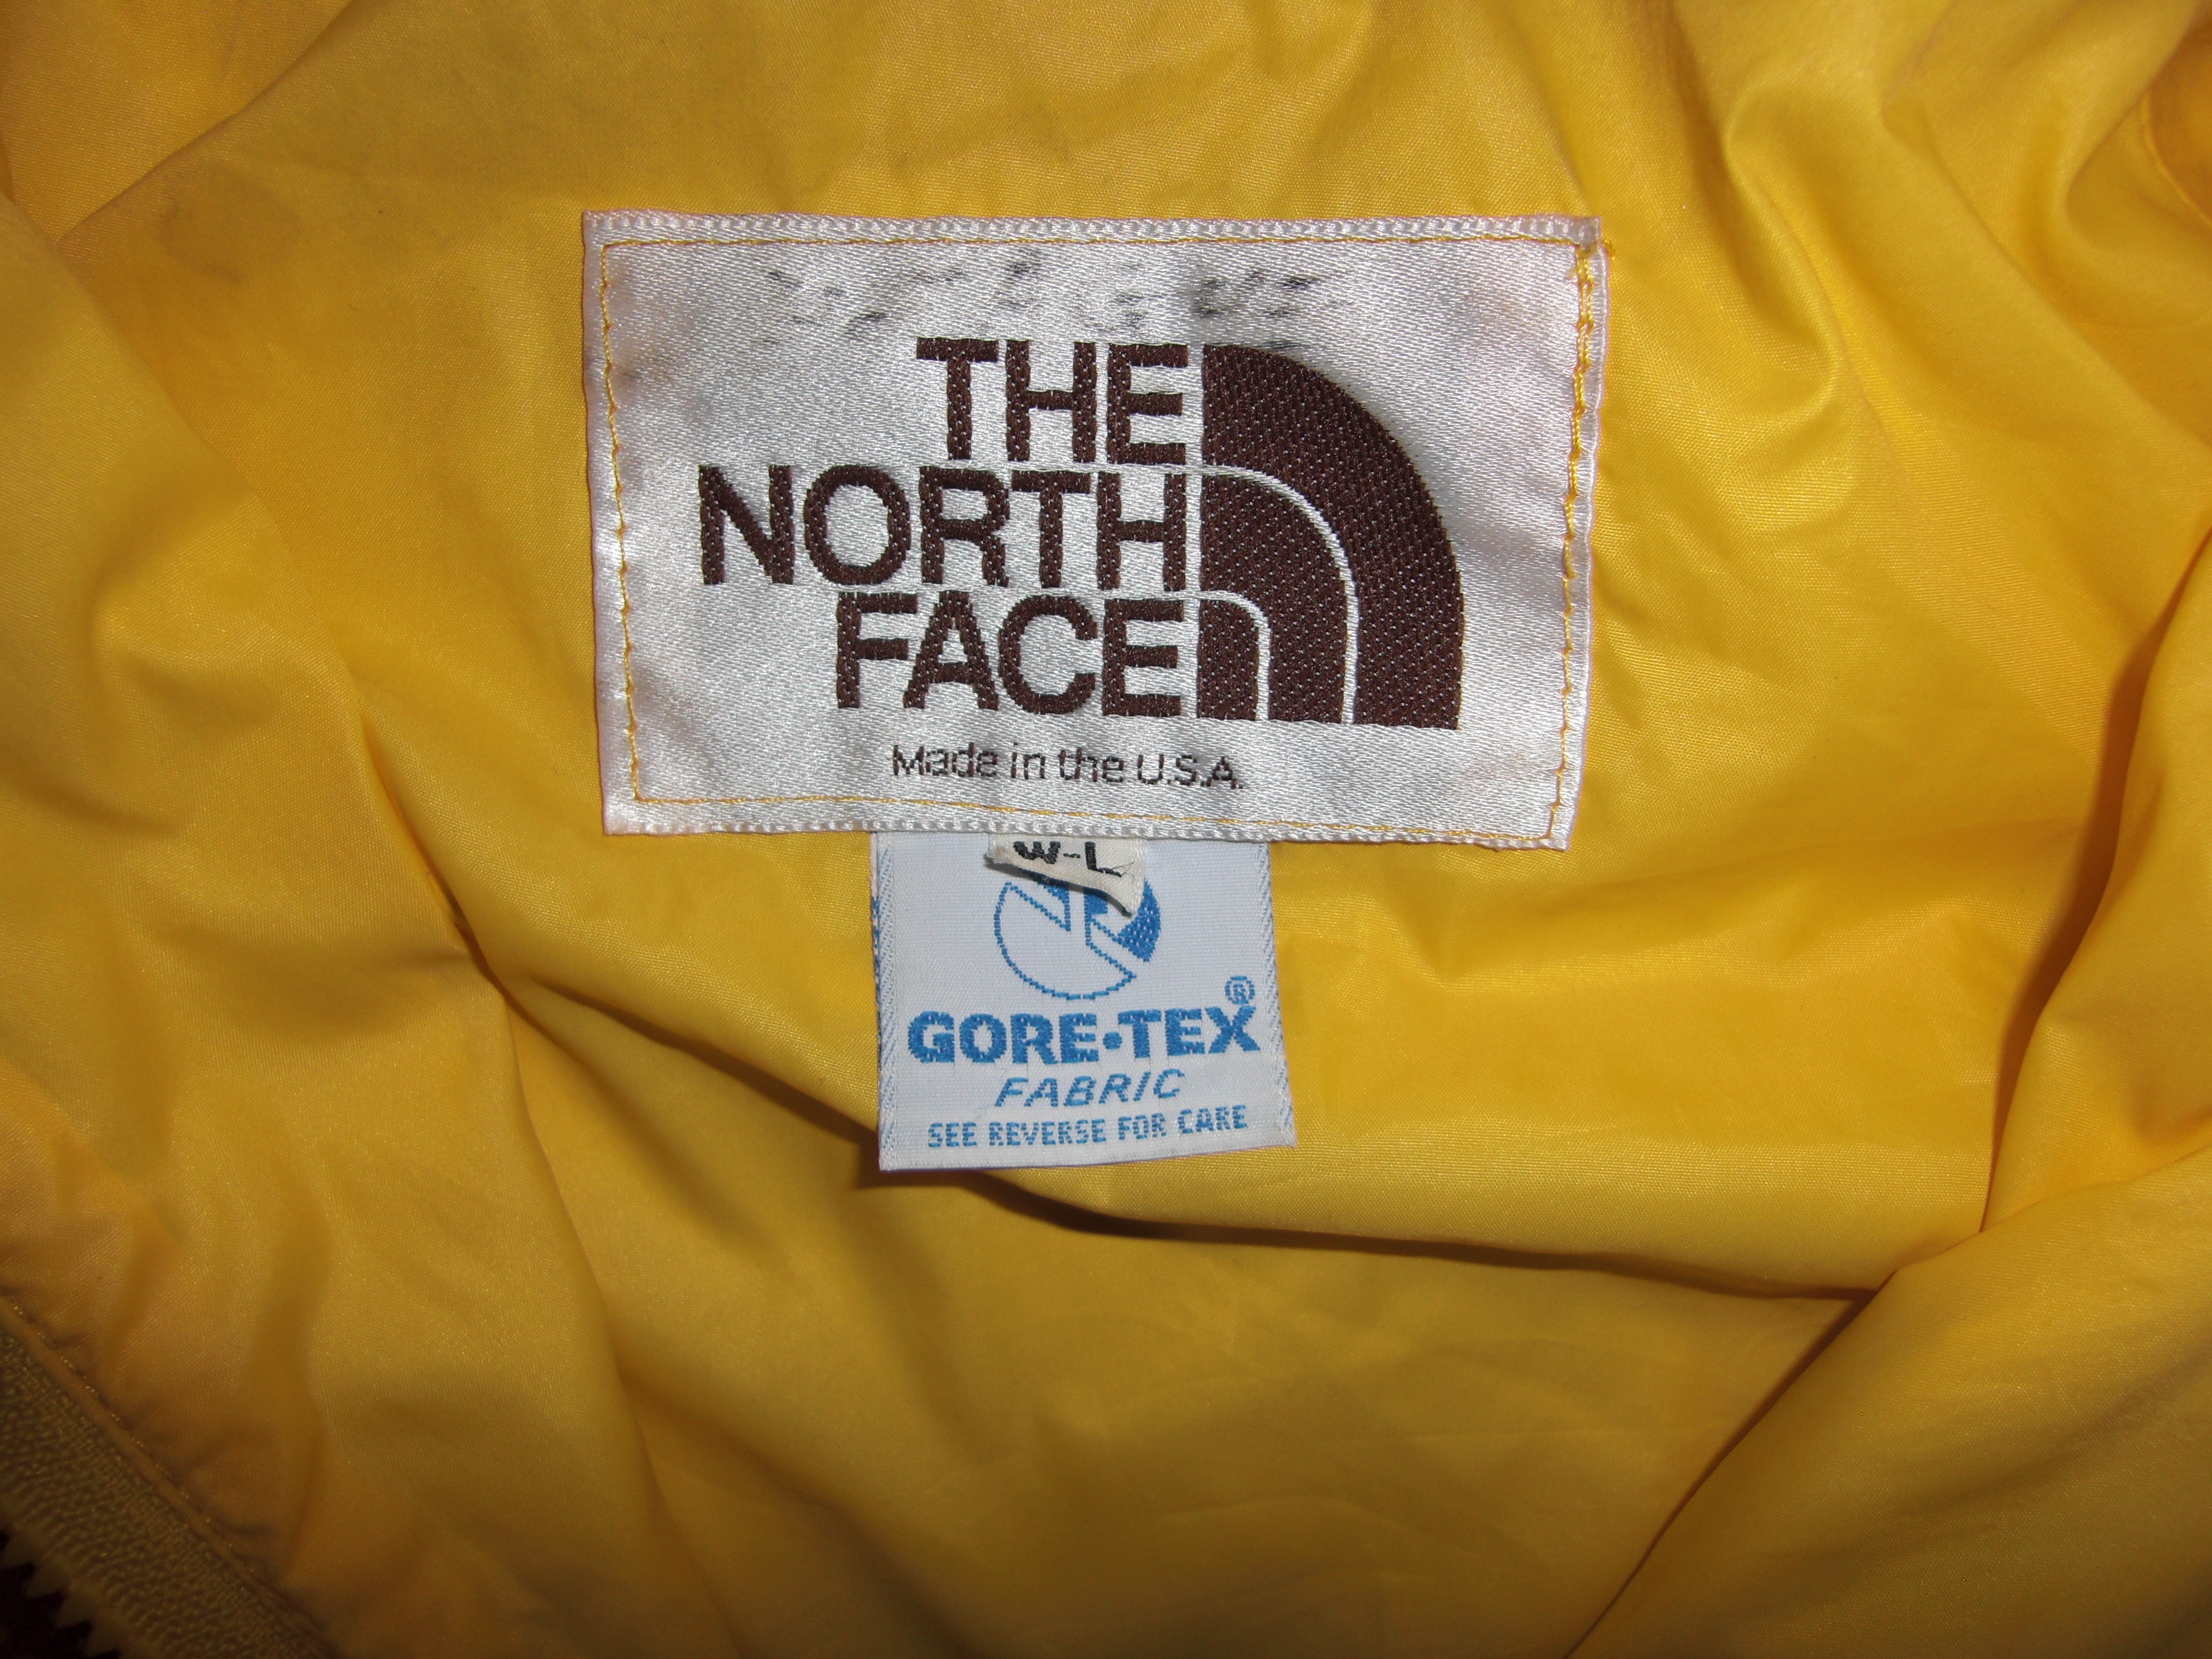 the north face label